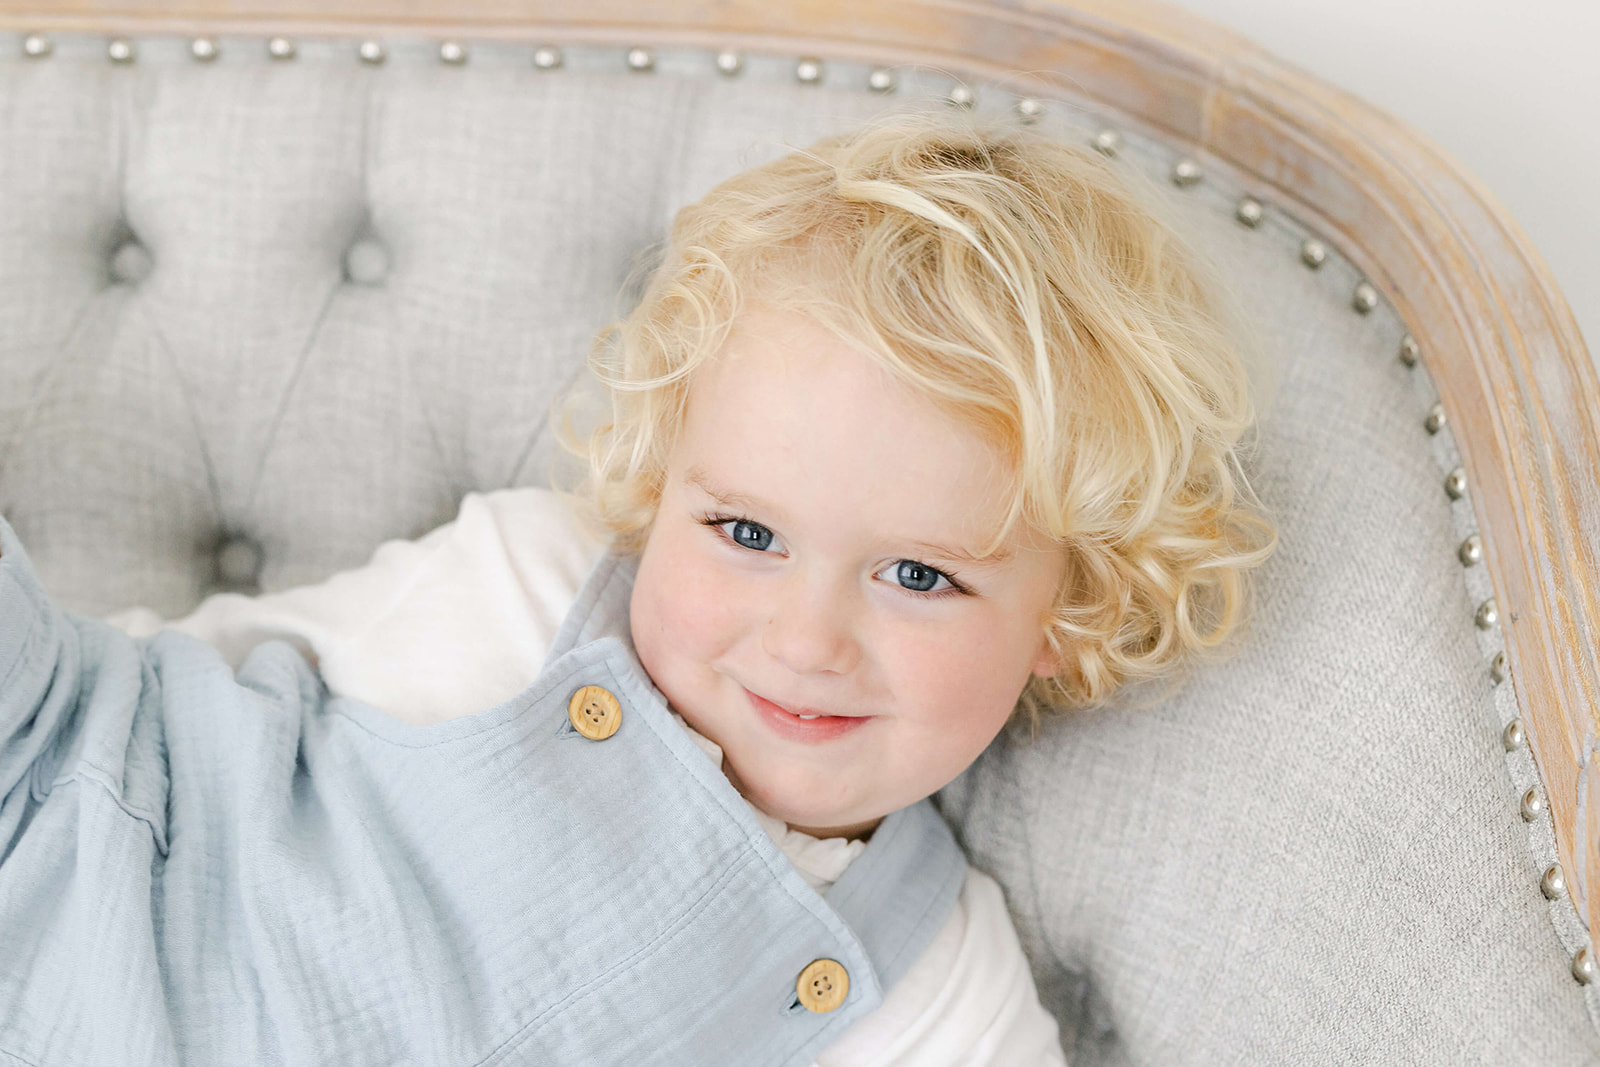 A toddler with long blonde hair plays on a bench in a studio in blue overalls